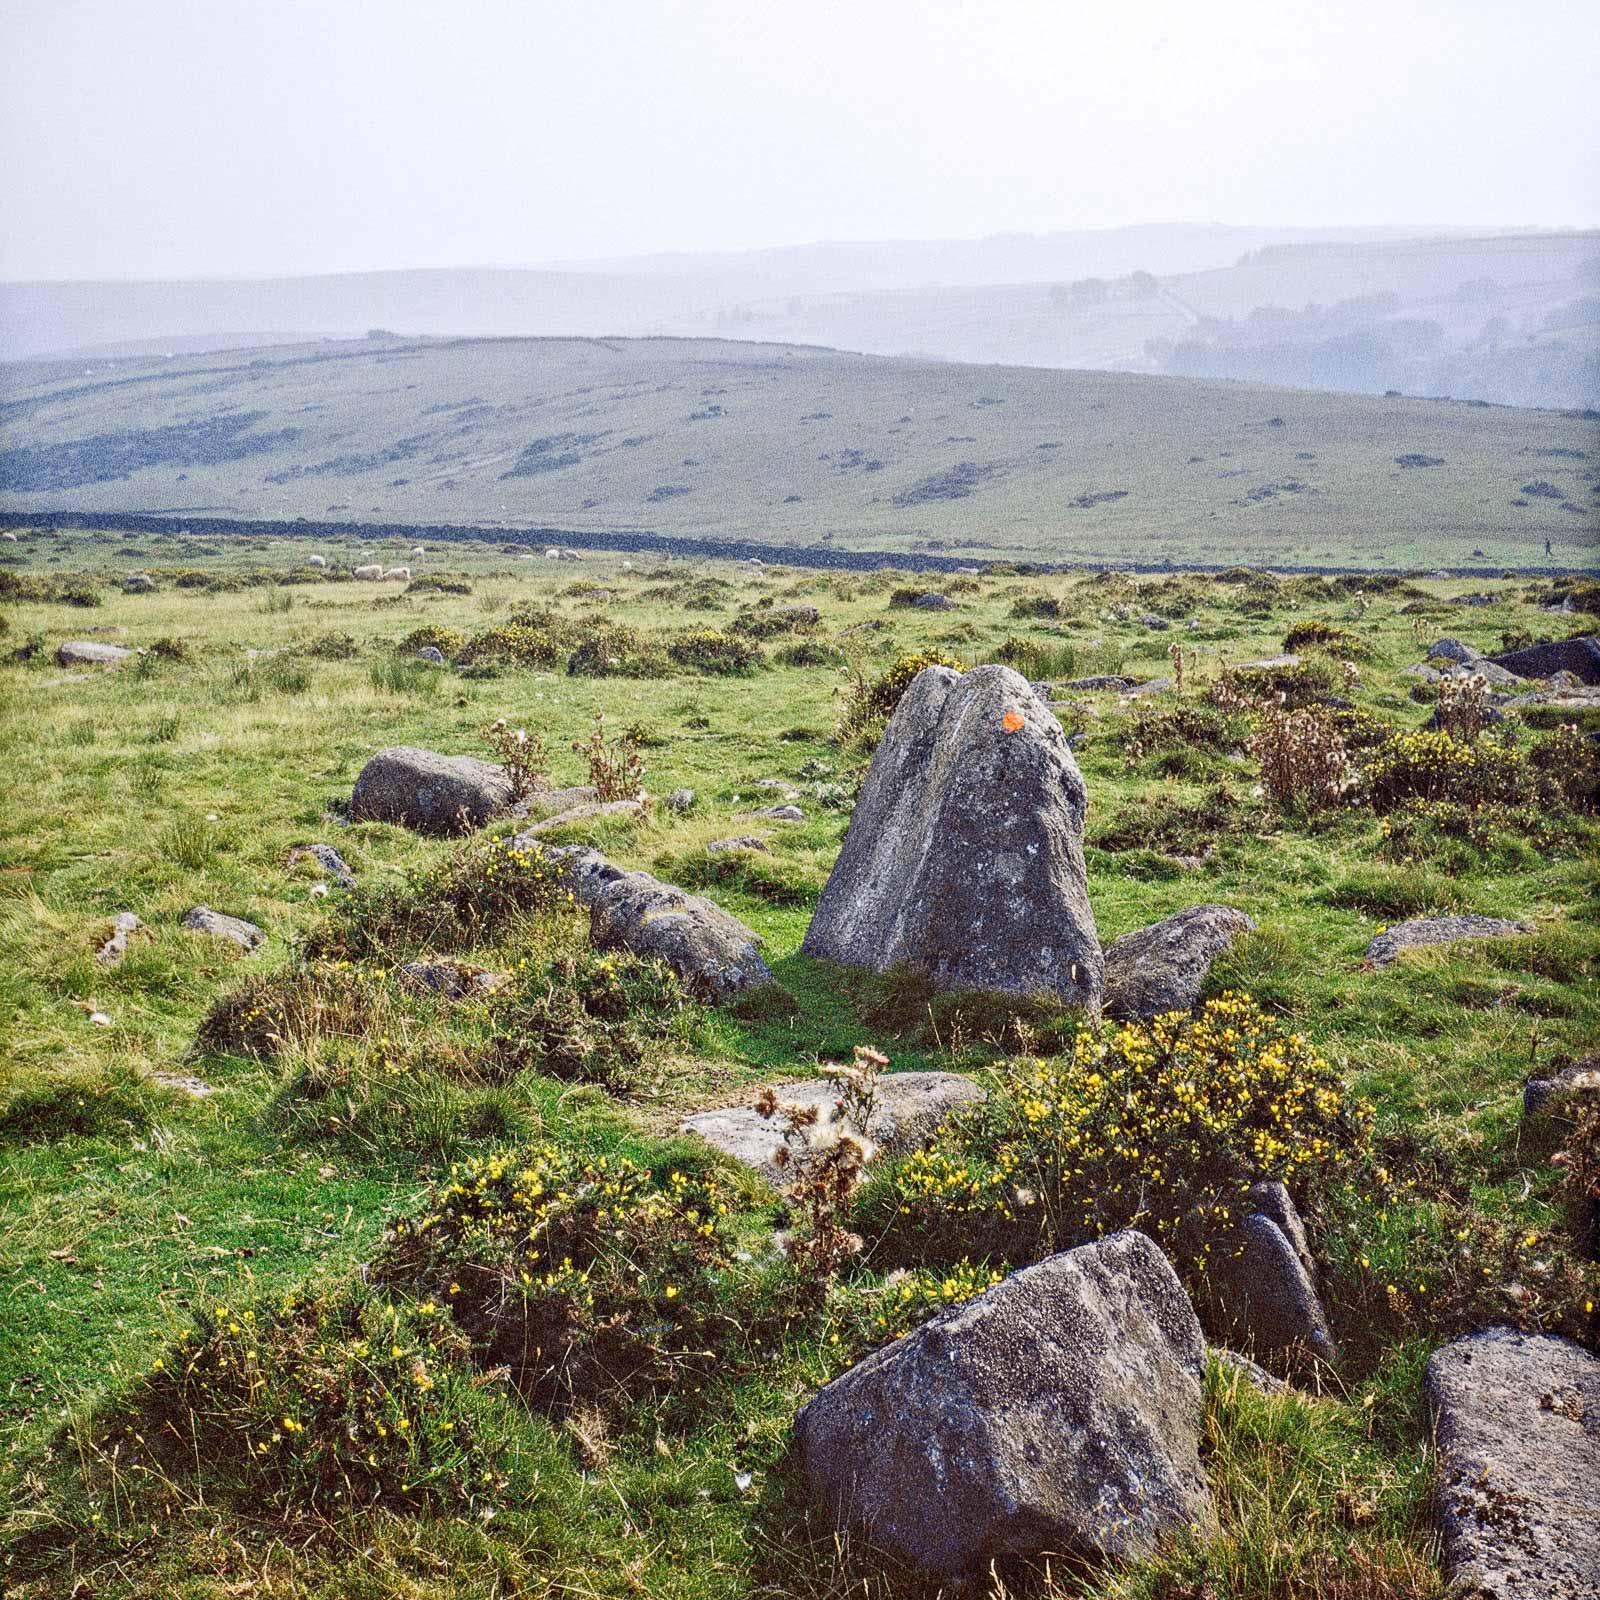 A series of twenty photographs captured along the high moor of Dartmoor National Park in Britain. Each photograph featuring an orange mark painted onto each stone marker.